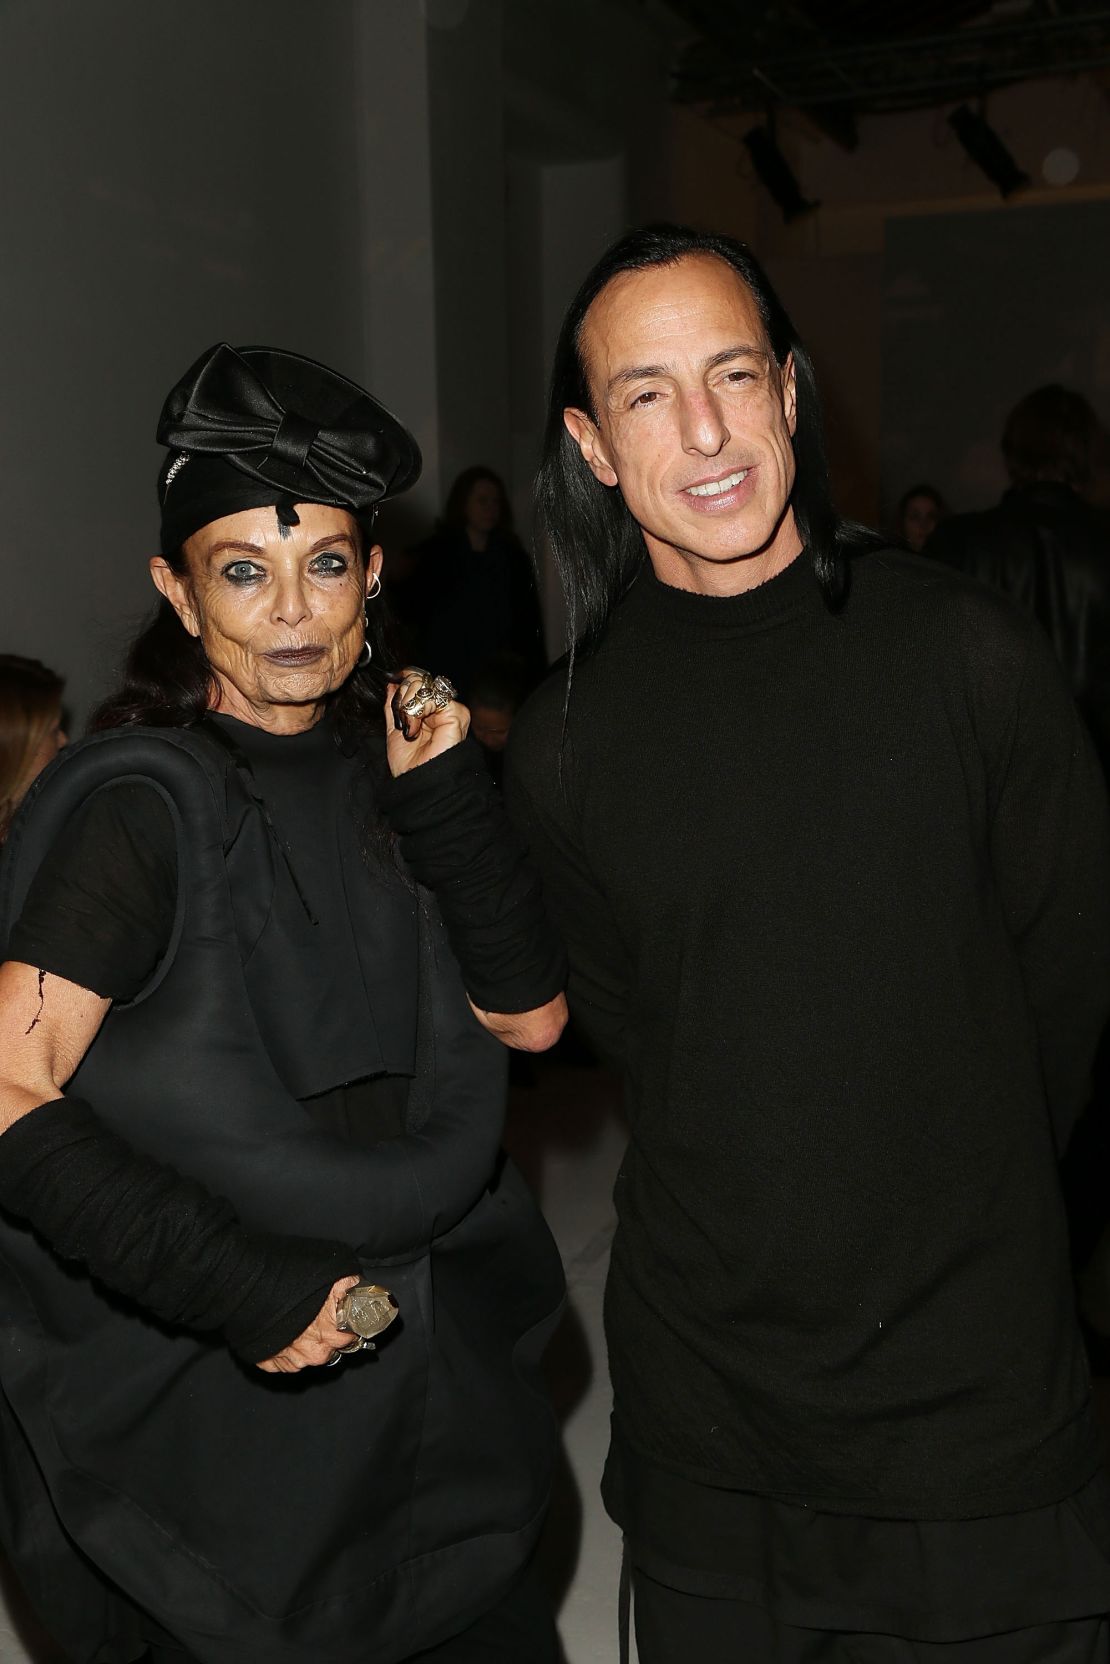 Michèle Lamy and Rick Owens attend the Gareth Pugh show as part of the Paris Fashion Week Womenswear in 2014.